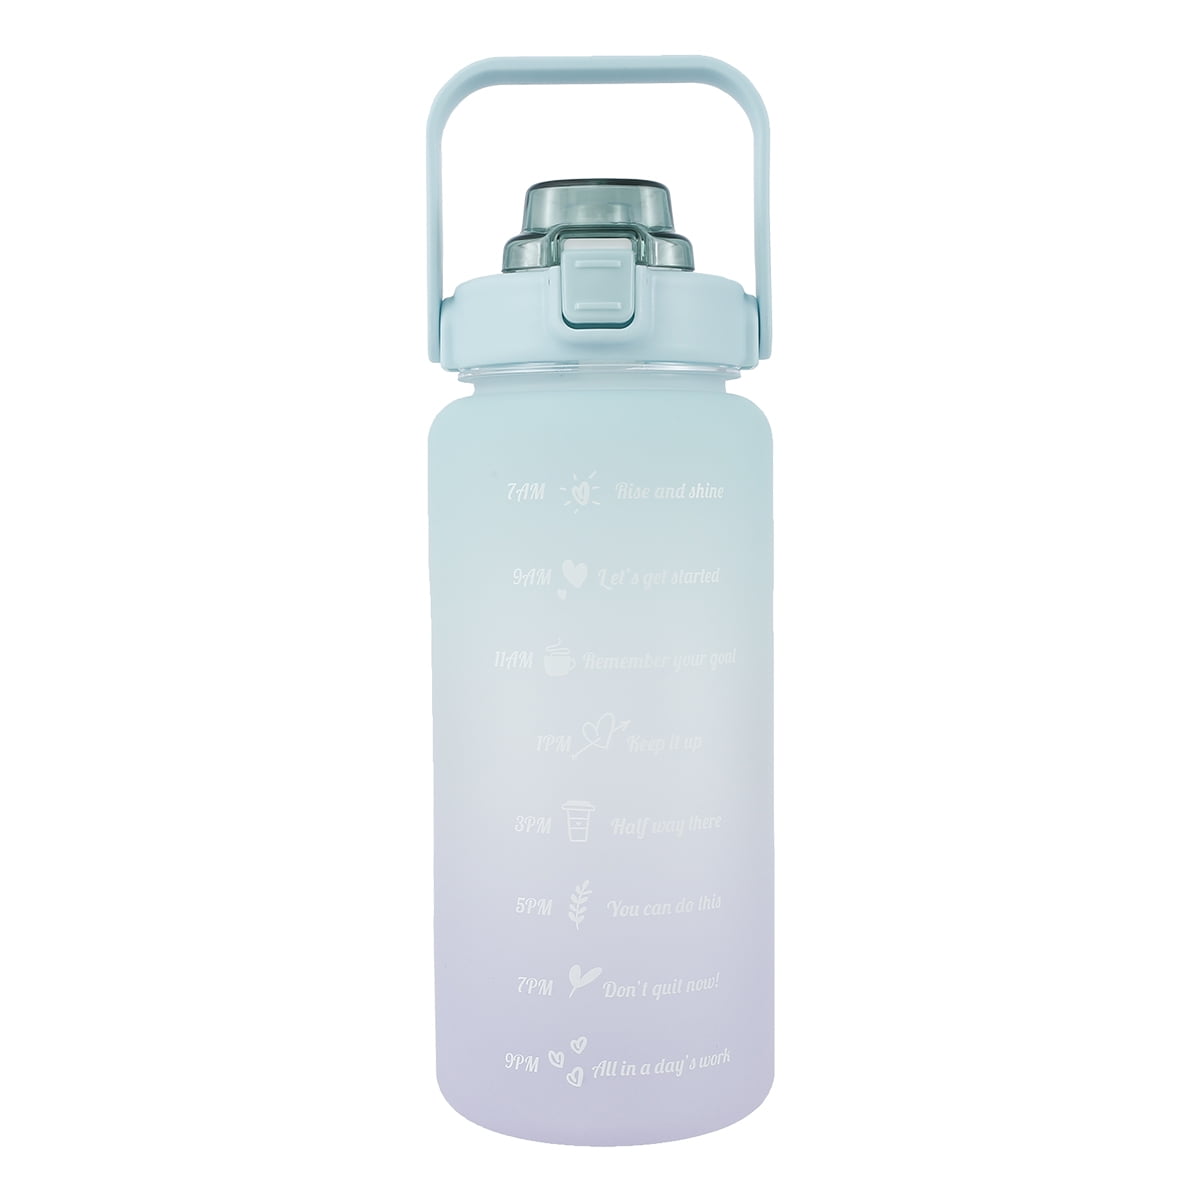 Camp and Outdoor Sports Travel 2 Liter Frosted Wide-Mouth Drinking Bottle for Fitness 2000ml 64oz/2000ml, Green to Pink Half Gallon/64oz Daily Sports Water Bottle with Straw & Motivational Time Marker Leakproof Tritan BPA Free Water Jug 